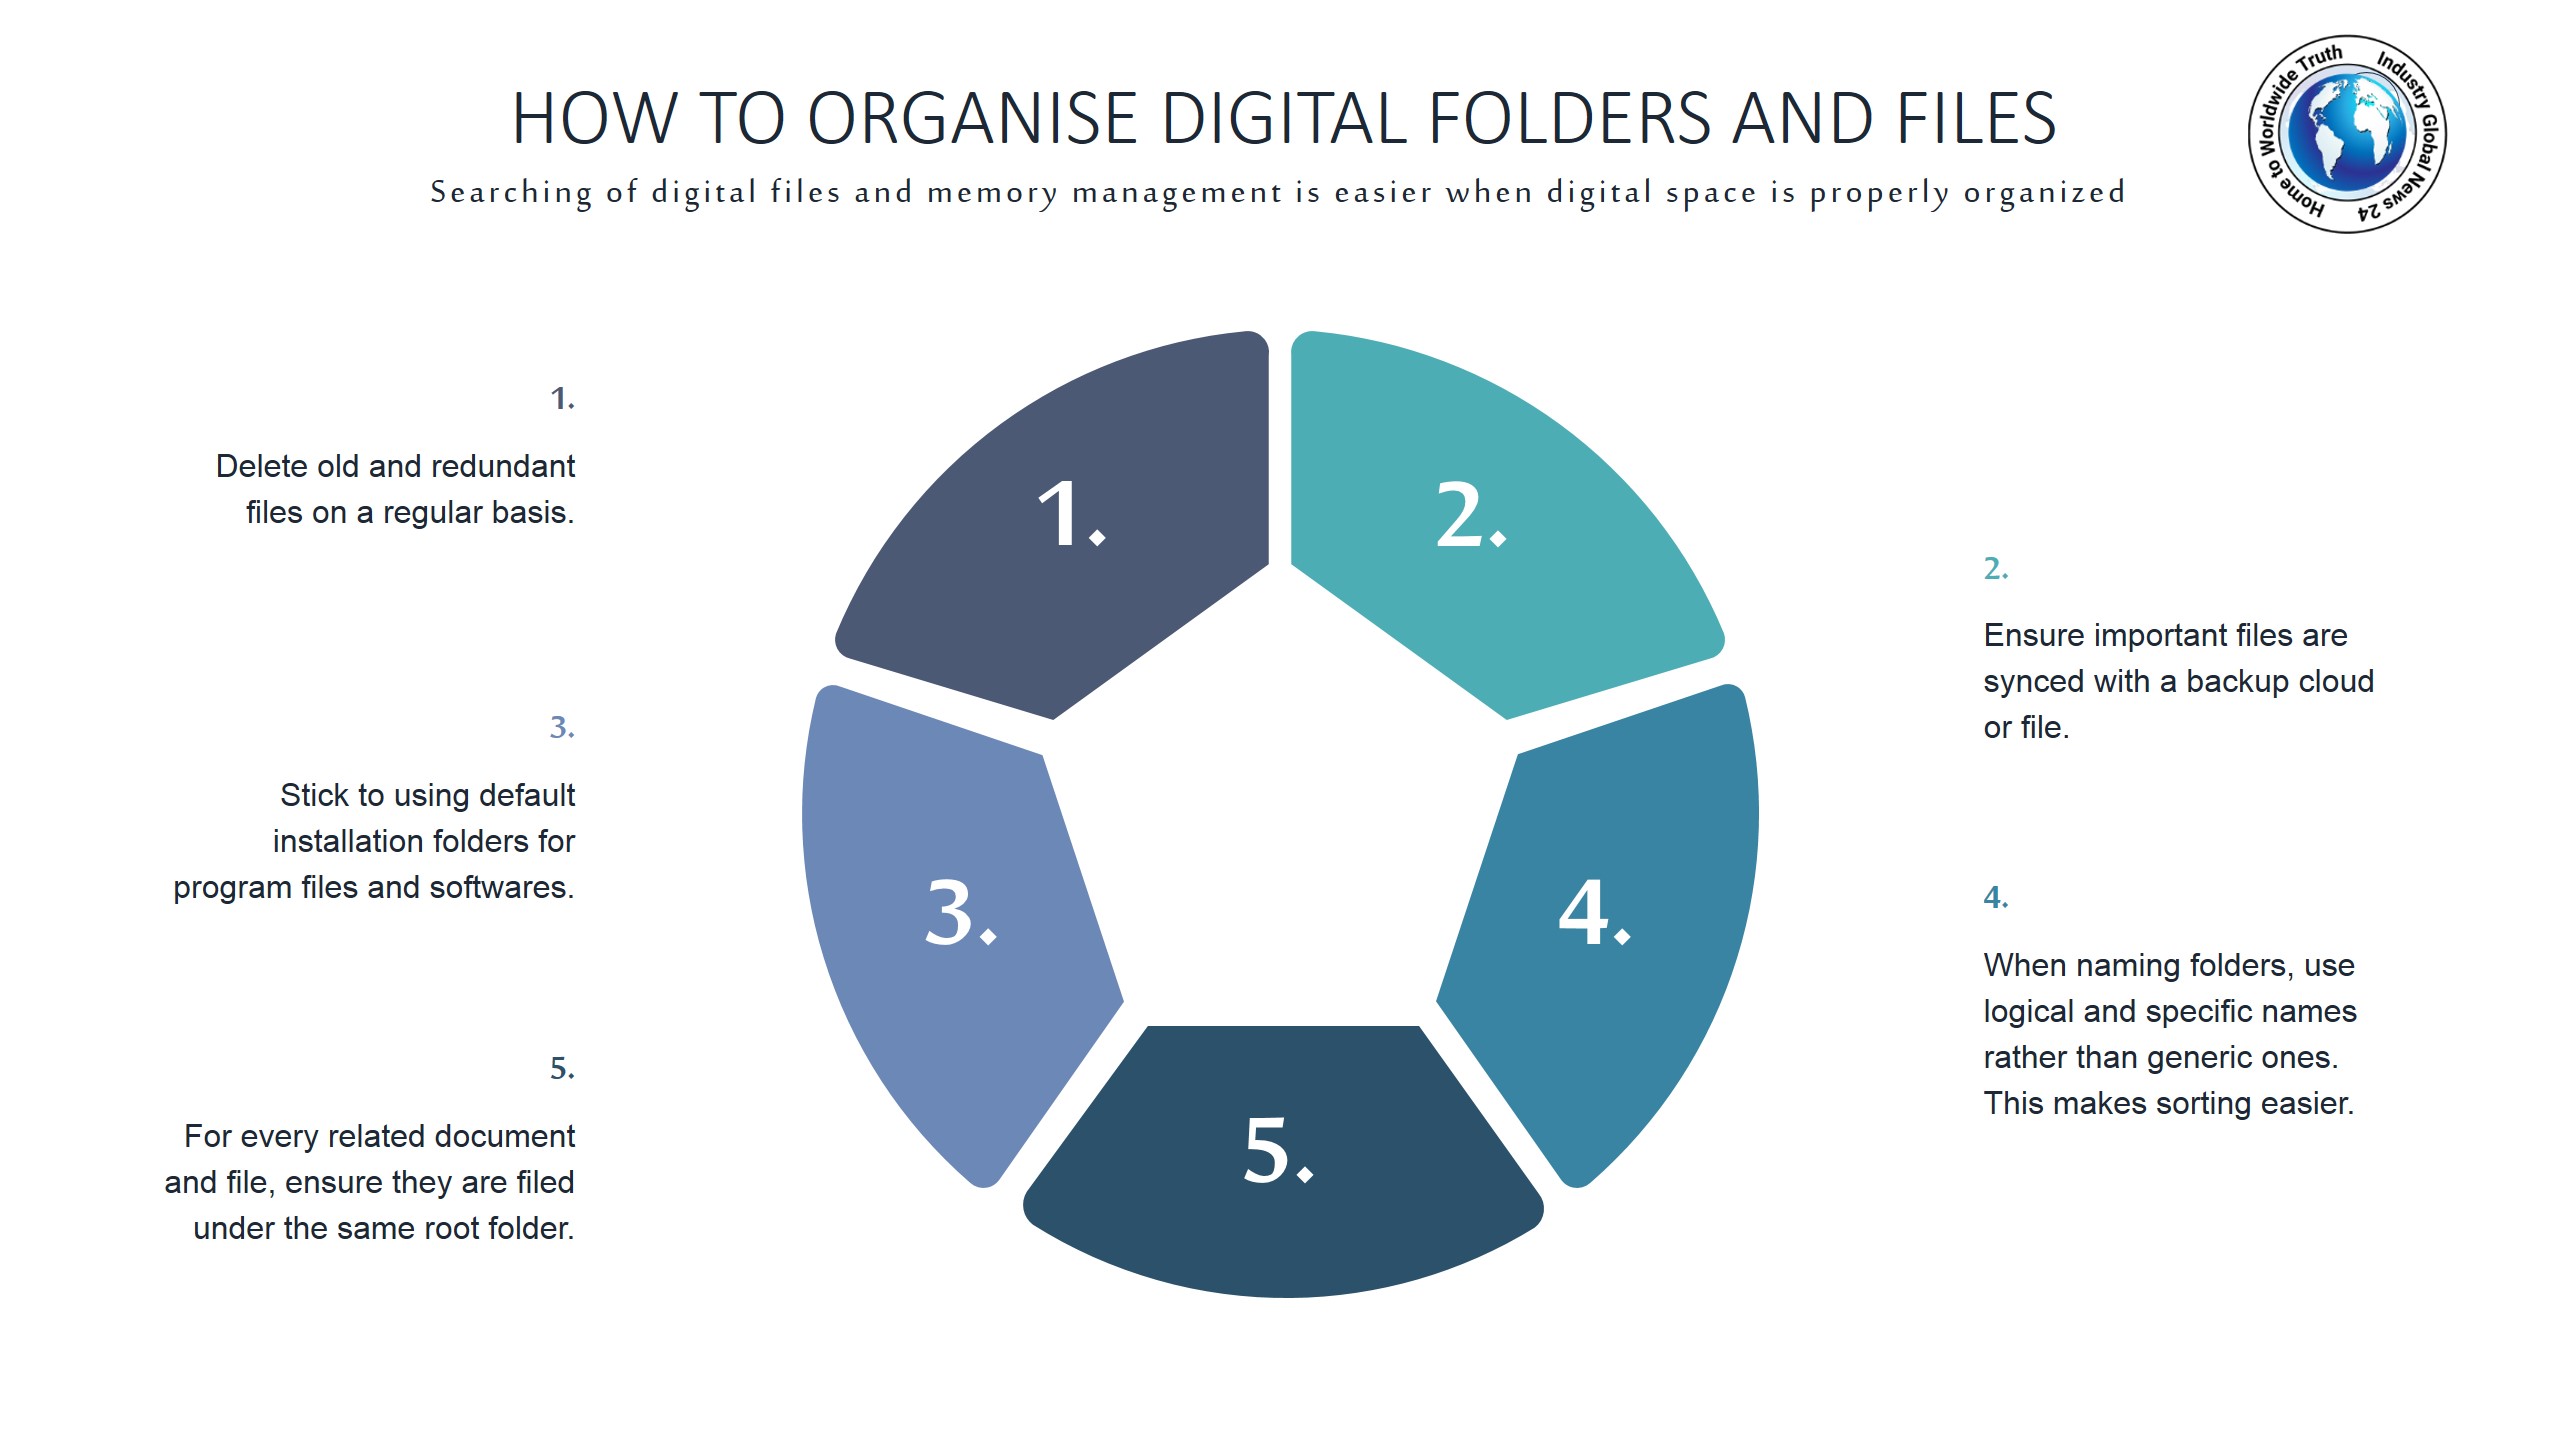 How to organise digital folders and files